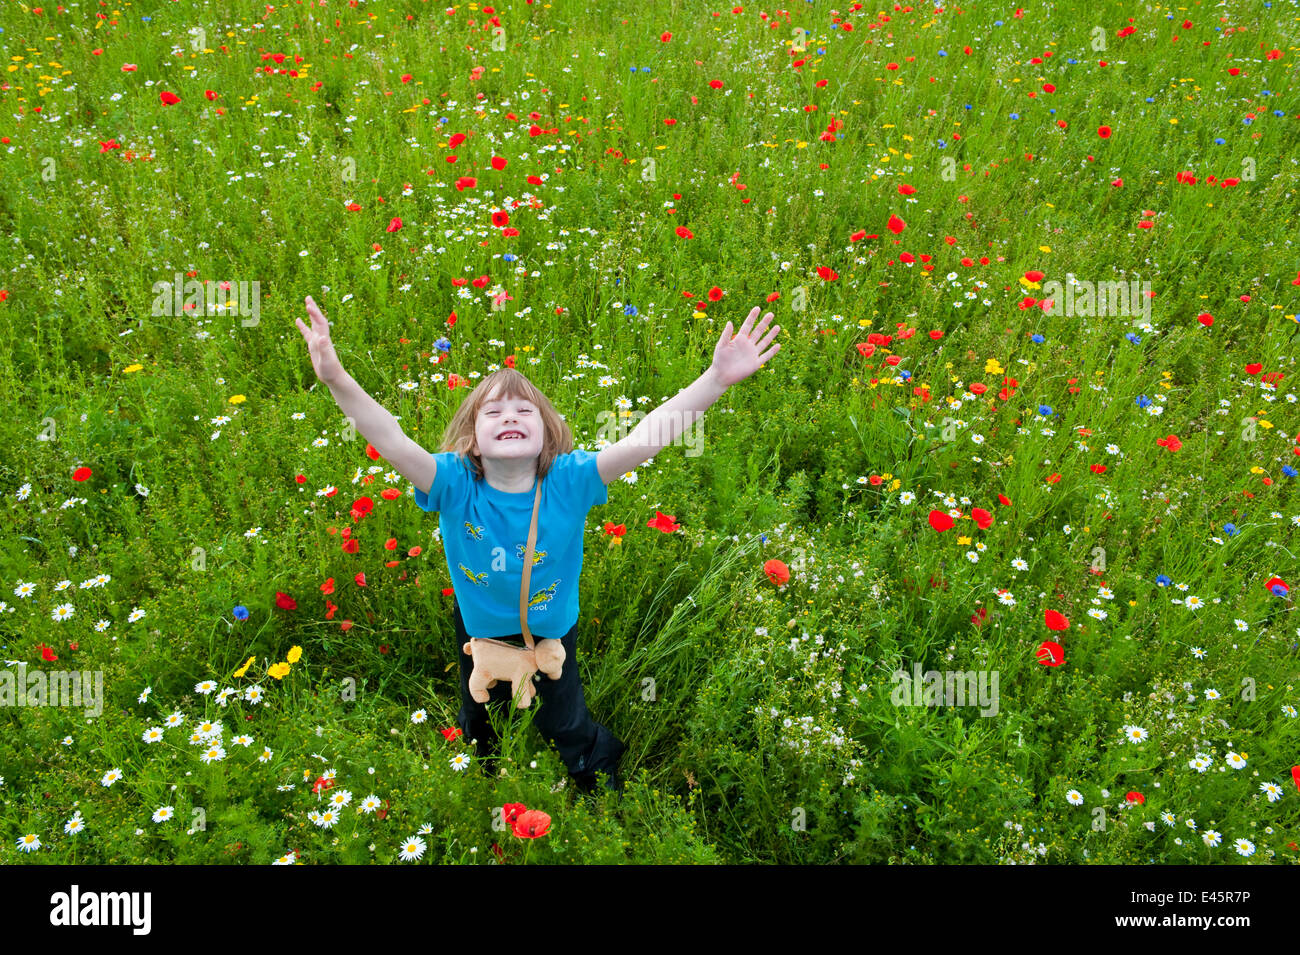 Young girl arms in air, waving / playing in a wildflower meadow, Scotland, UK, July 2009. Model released Stock Photo